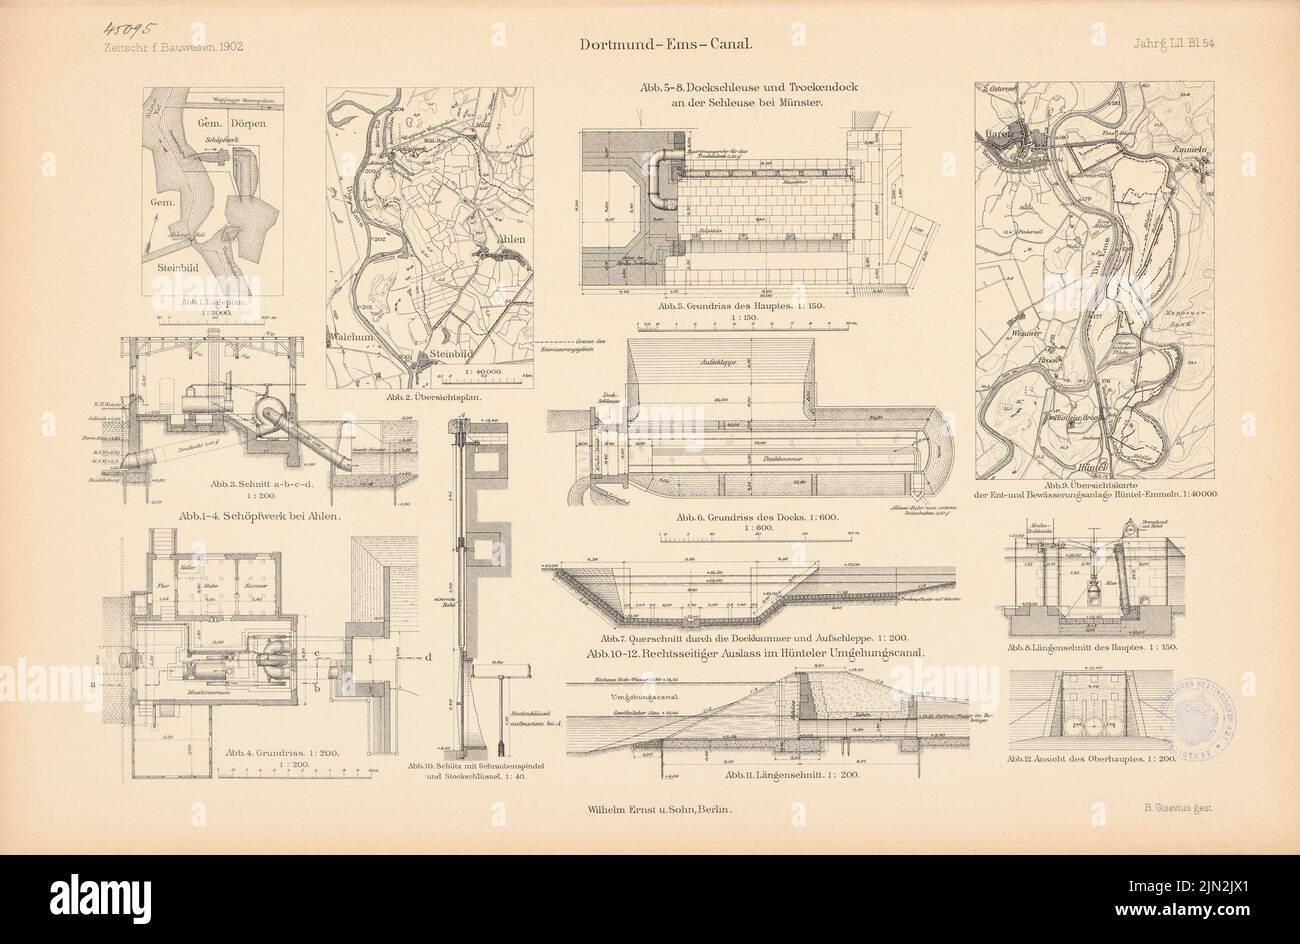 N.N., Dortmund-Ems-Canal. Schleuse, Münster. (From: Atlas to the magazine for Building, ed. V. Ministry of Public Work, Jg. 52, 1902): Dock lock and dry dock: location plans, floor plans, cuts 1: 600, 1,200, 1: 150, 1:40. Stitch on paper, 29.6 x 44.9 cm (including scan edges) Stock Photo